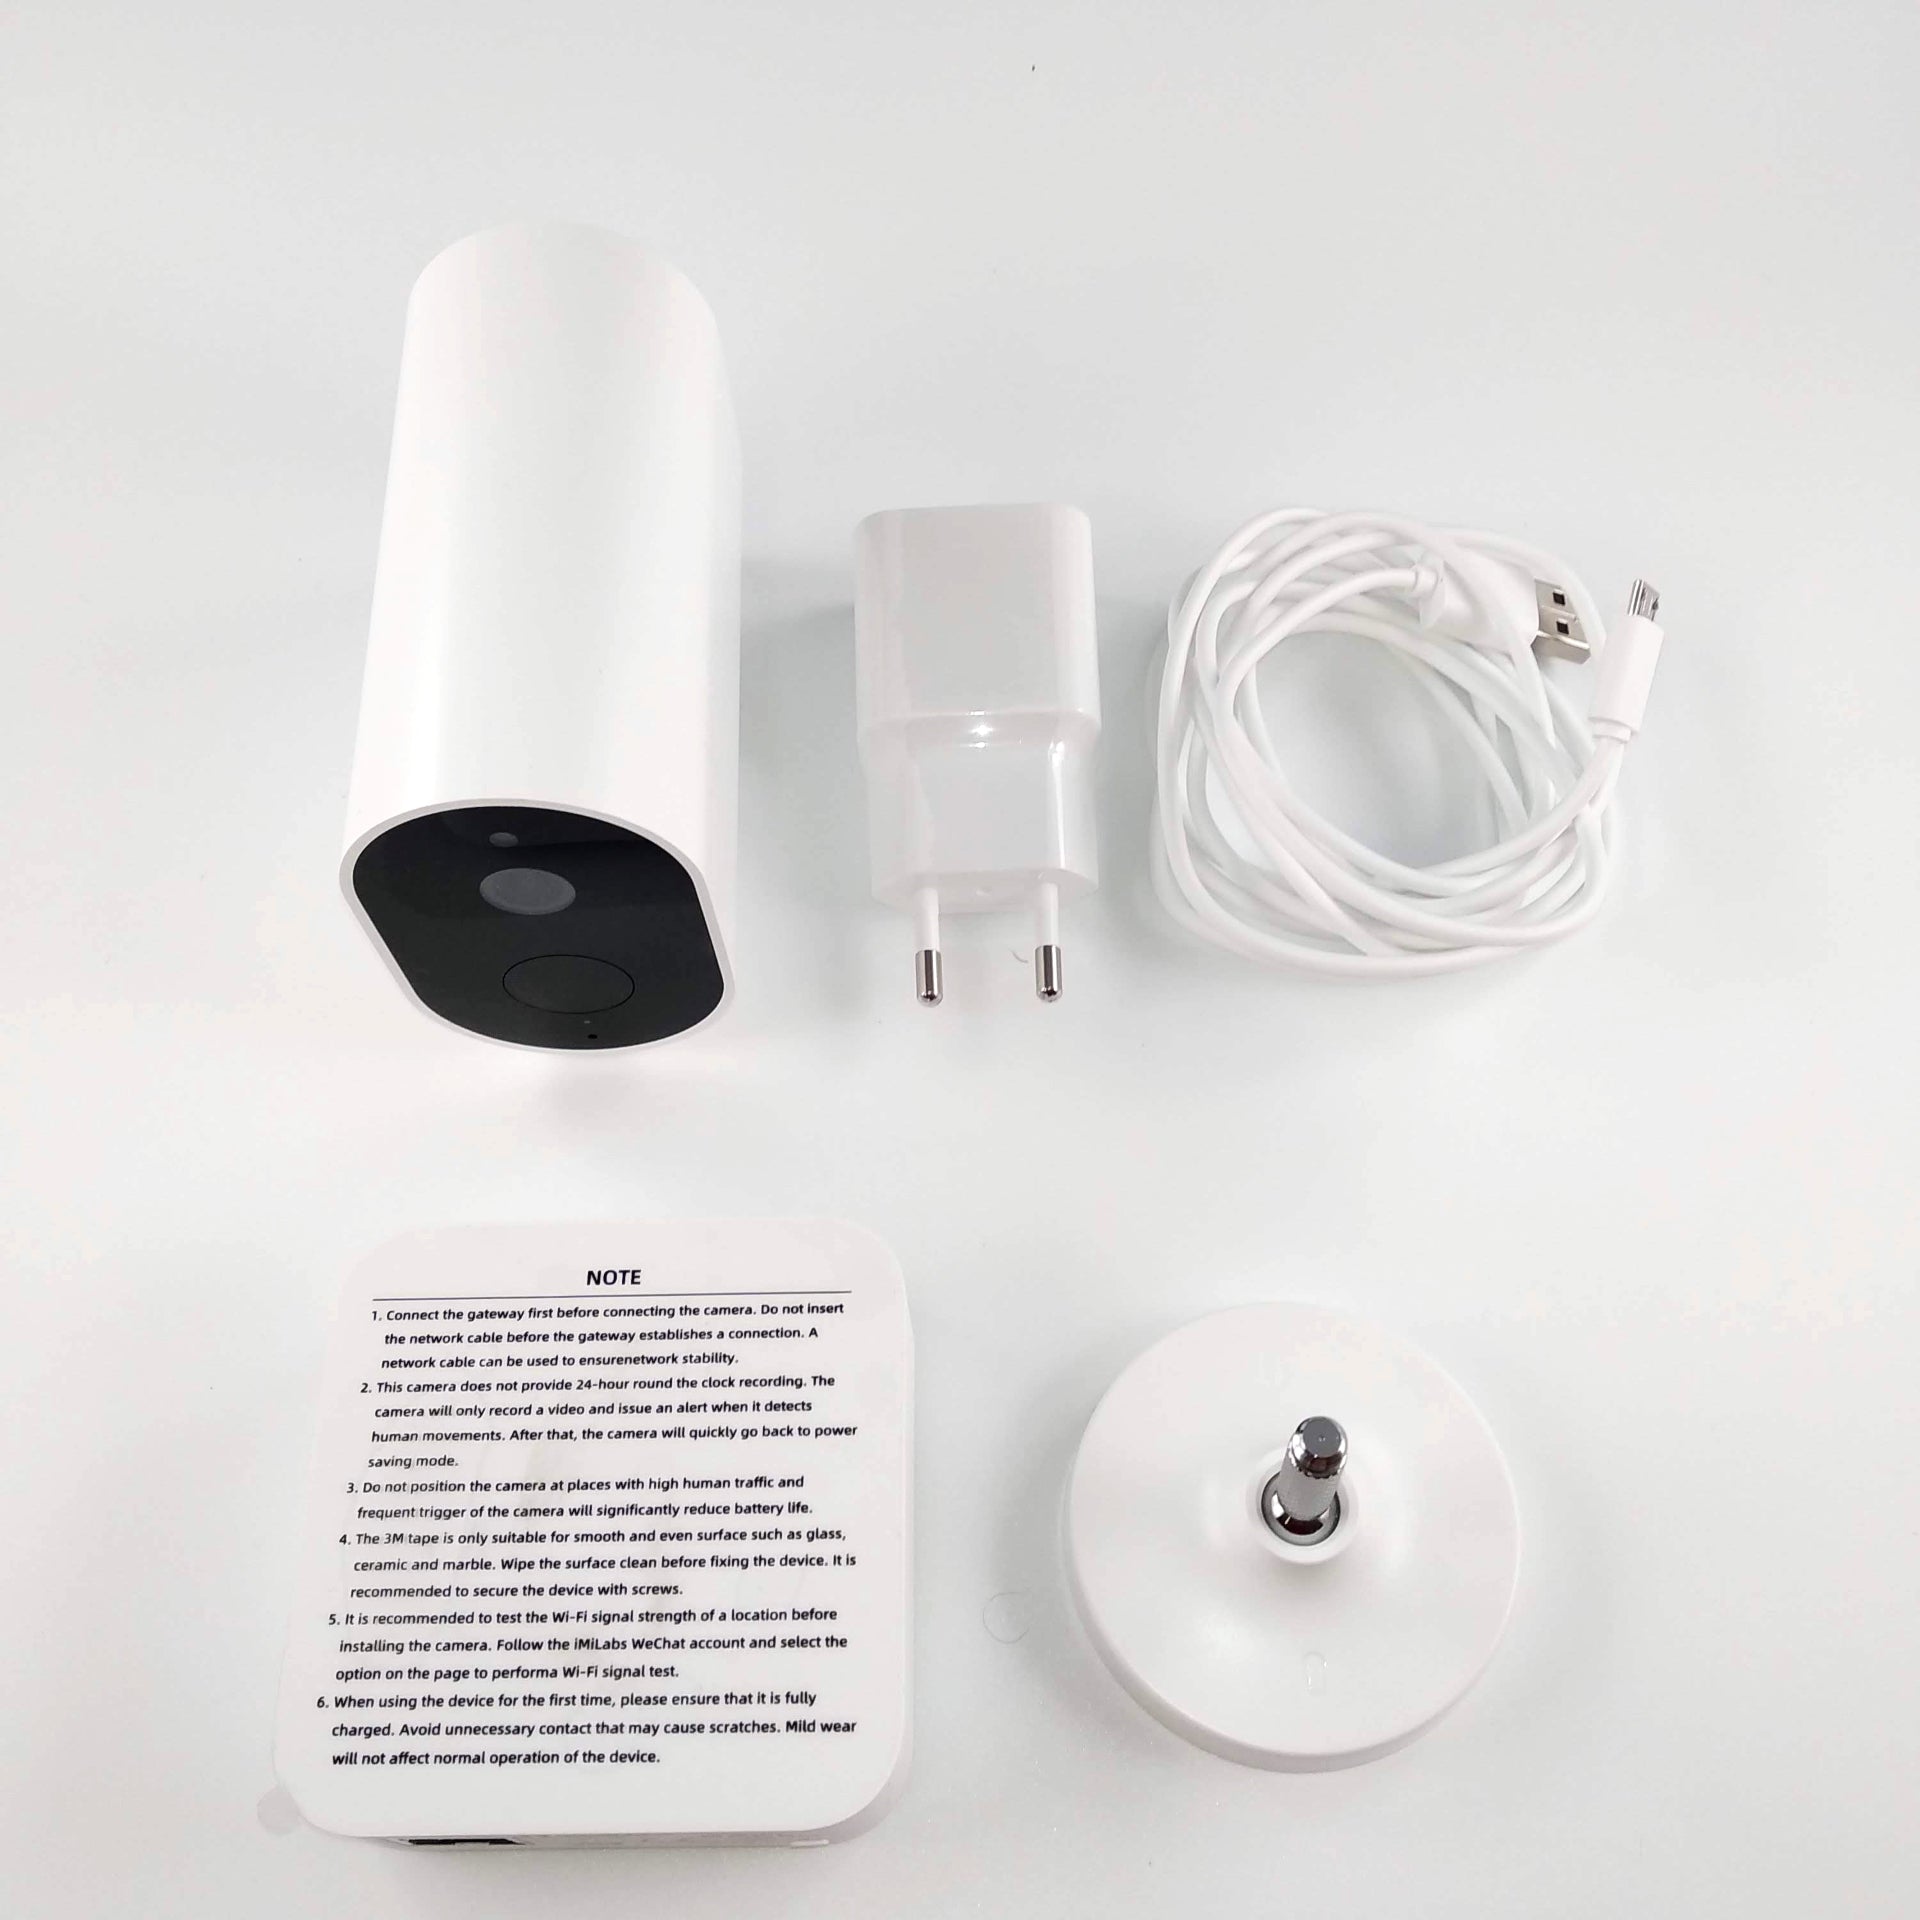 Wireless, stand-alone & rechargeable video surveillance camera